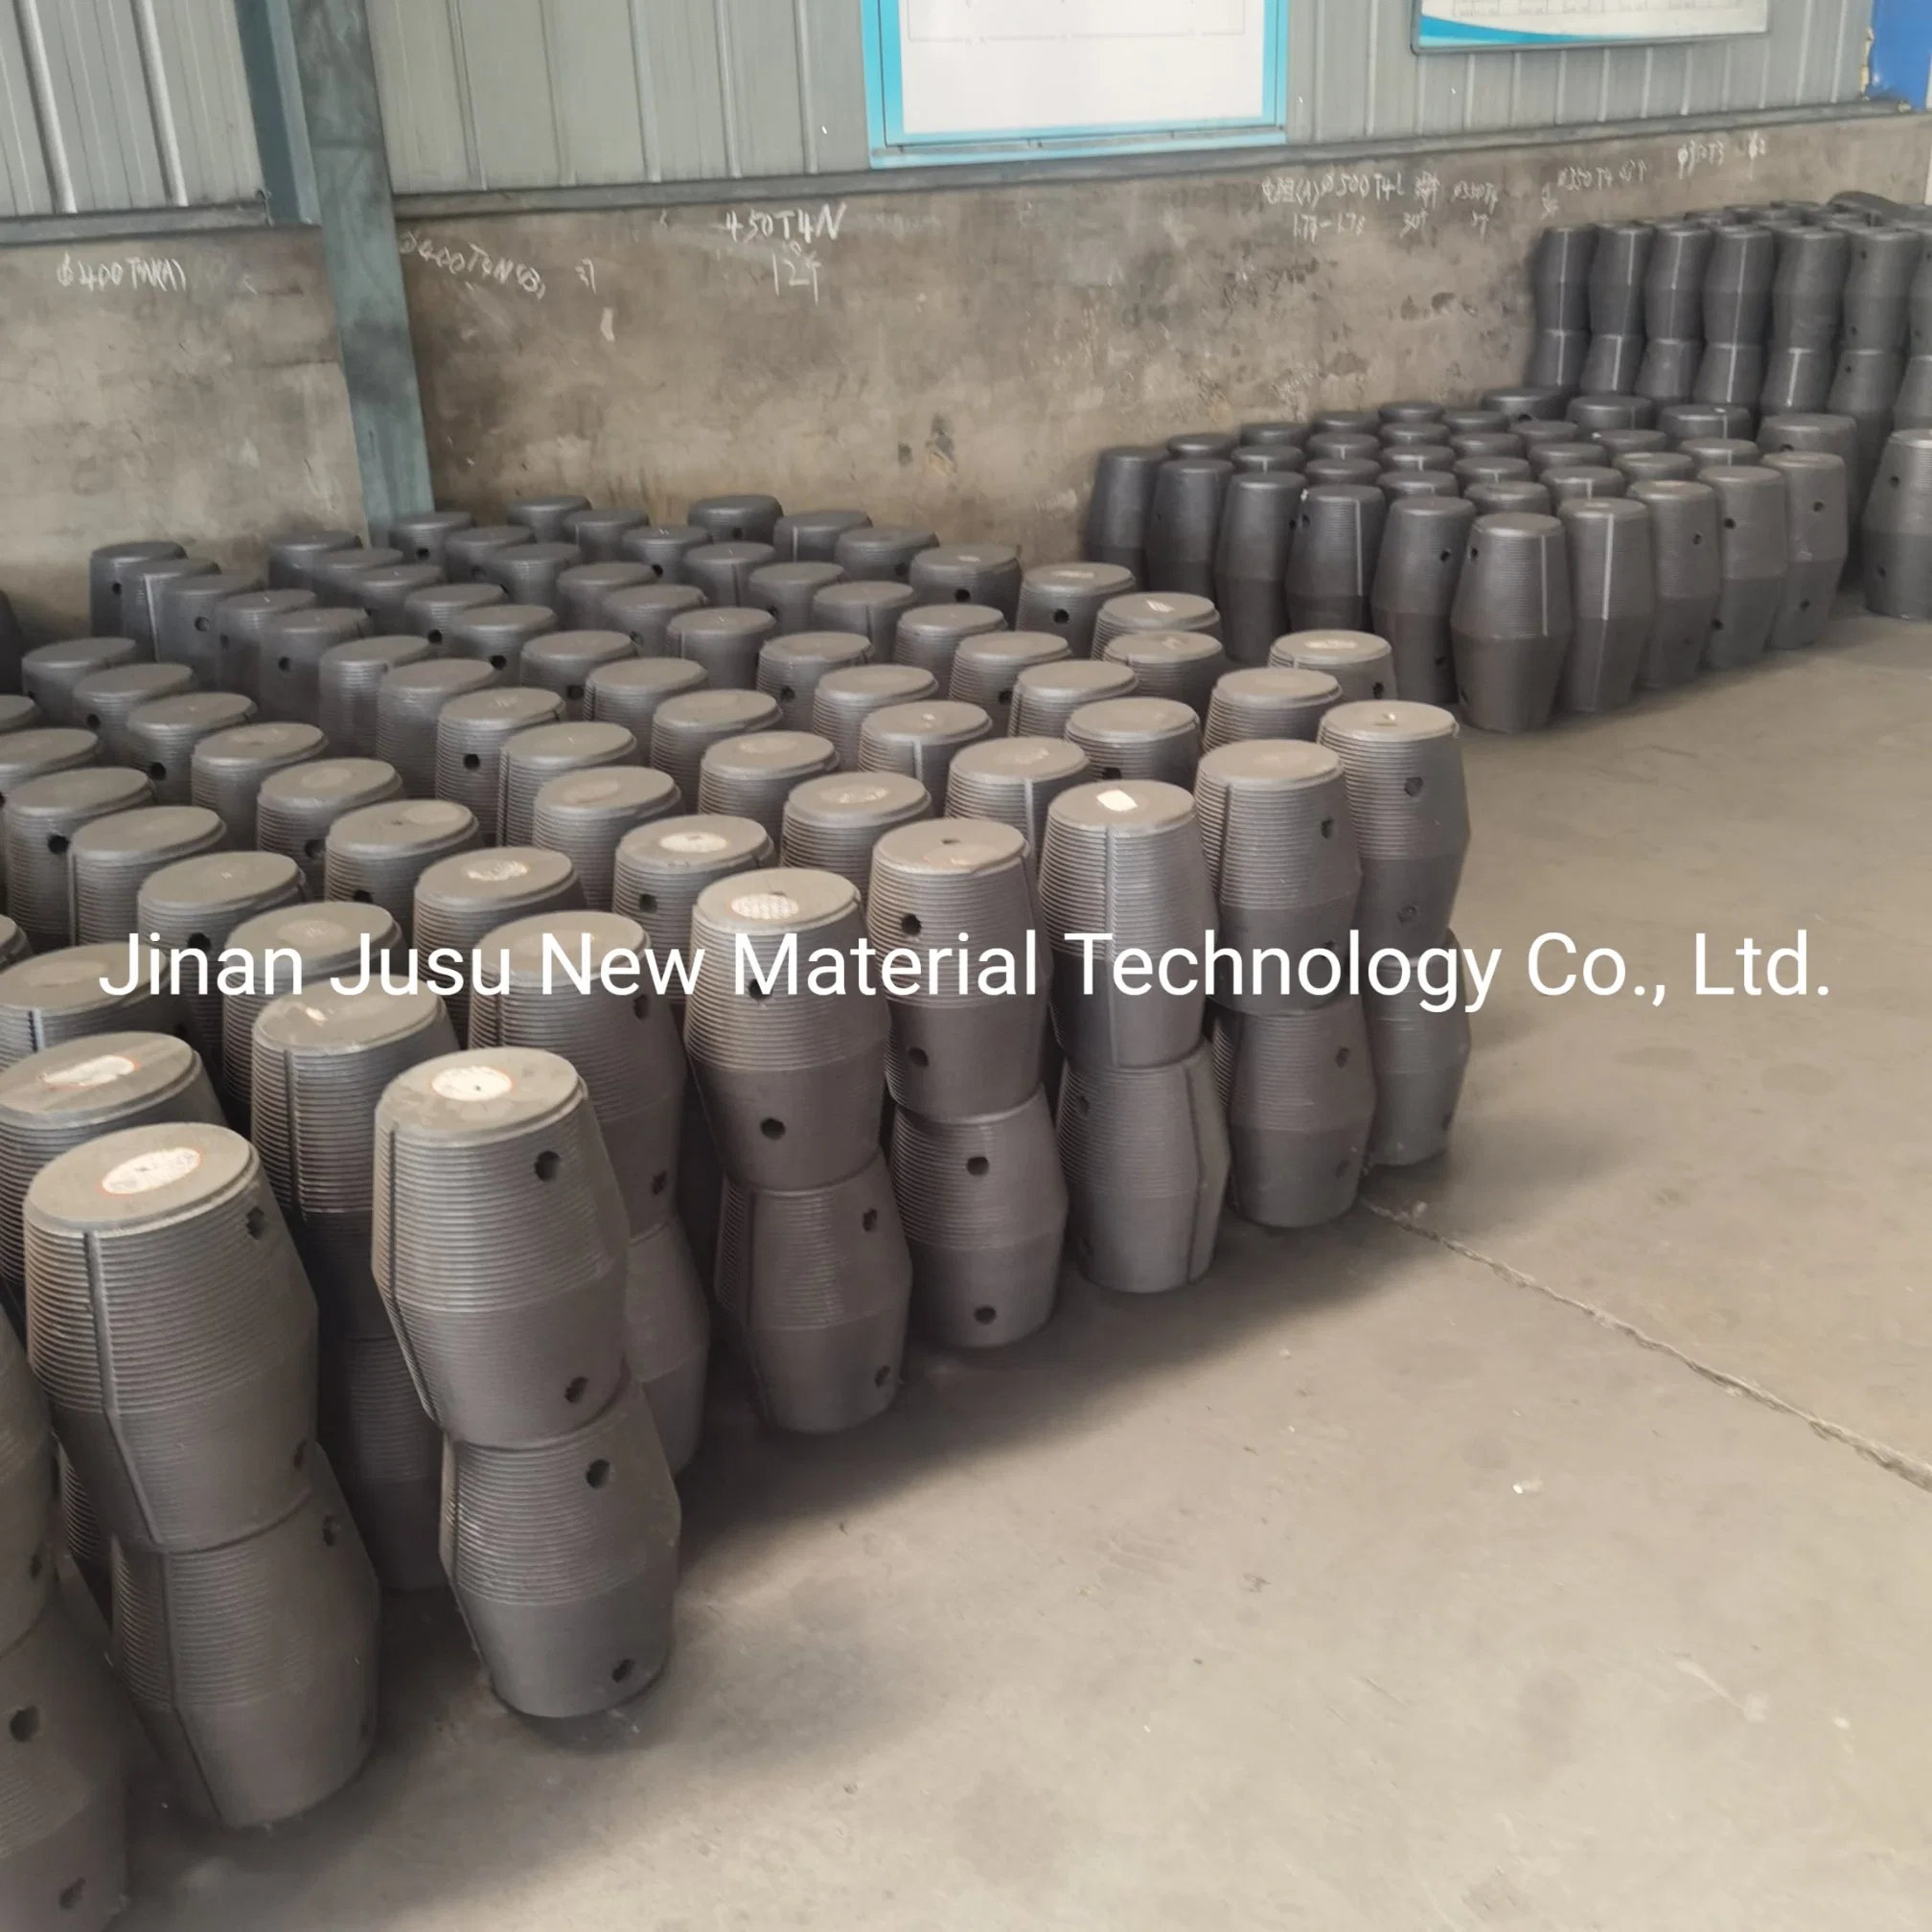 China Products High Quality and Competitive Price for Graphite Electrode UHP300